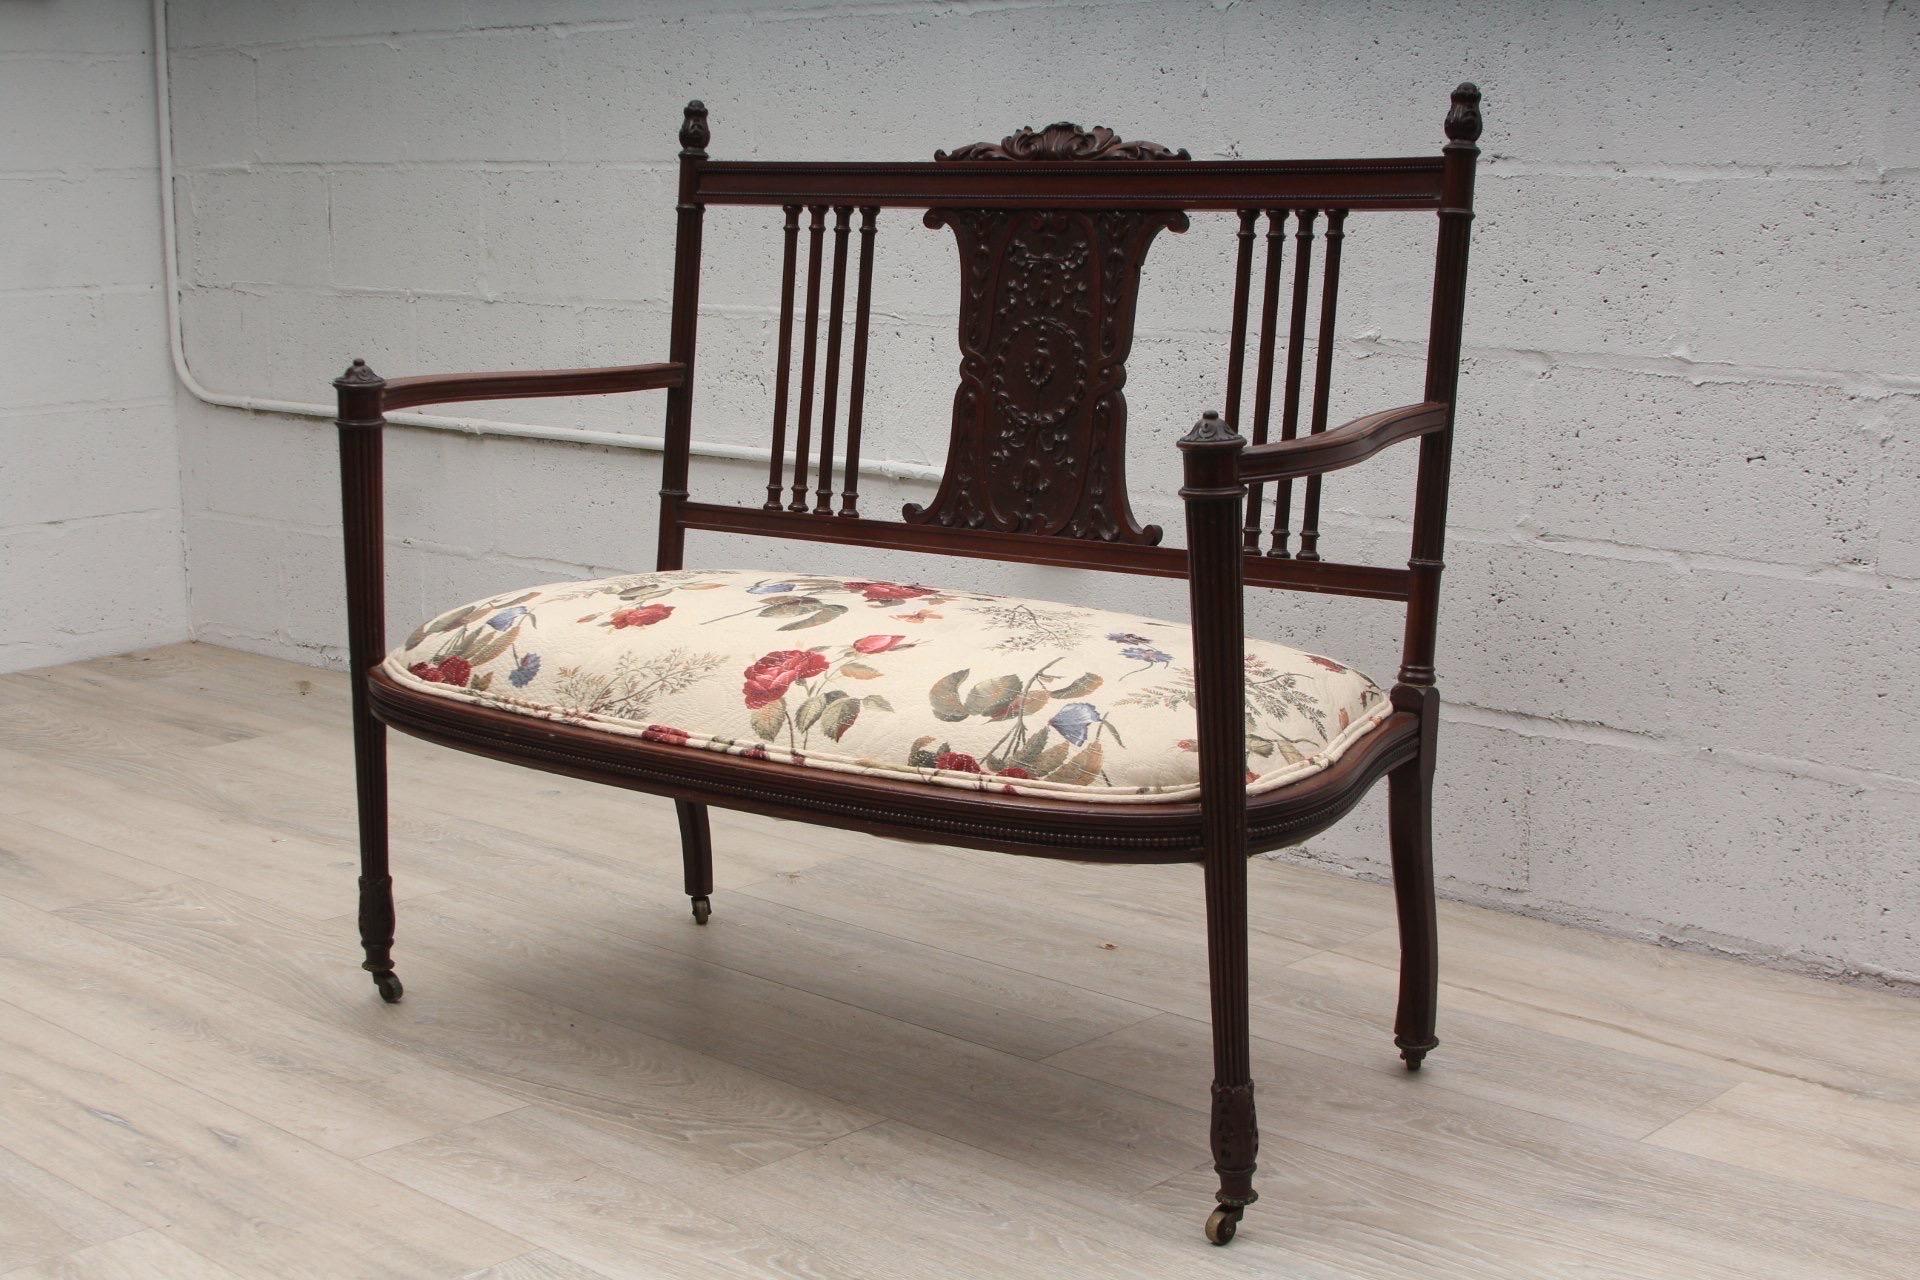 Antique carved fruitwood settee with upholstered seat.

French, circa 1910 with later upholstery.

Dimensions: 42.5”L x 24”W x 35.5”H
Arm Height- 17”
Seat Height- 25.5”